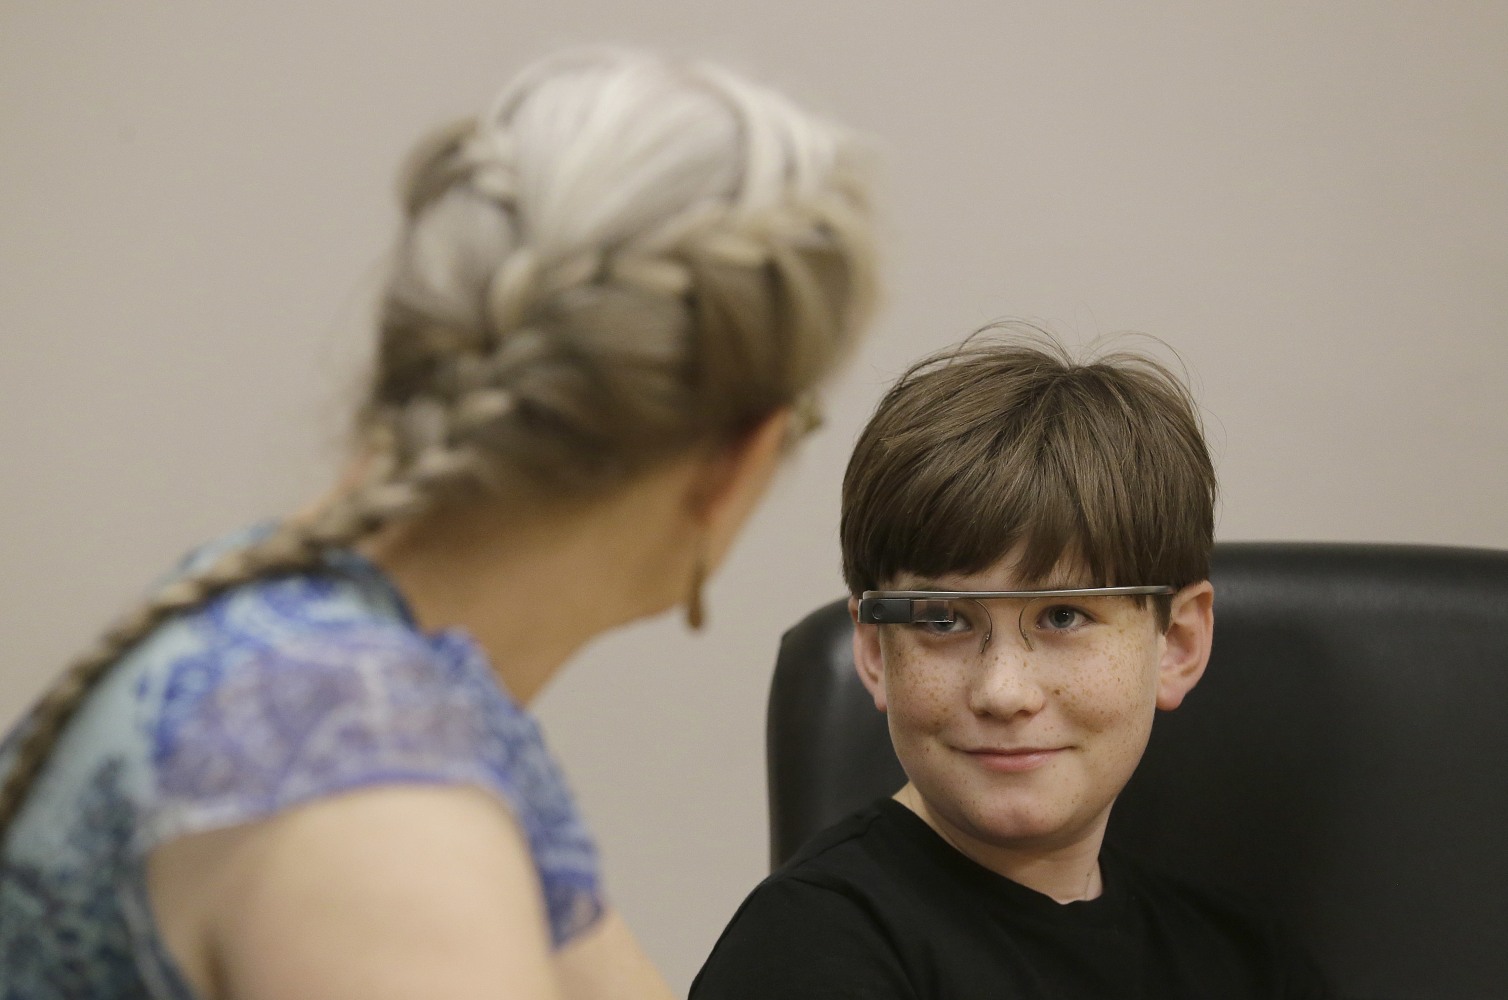 Google Glass App Helps Kids with Autism 'See' Emotions - NBC News